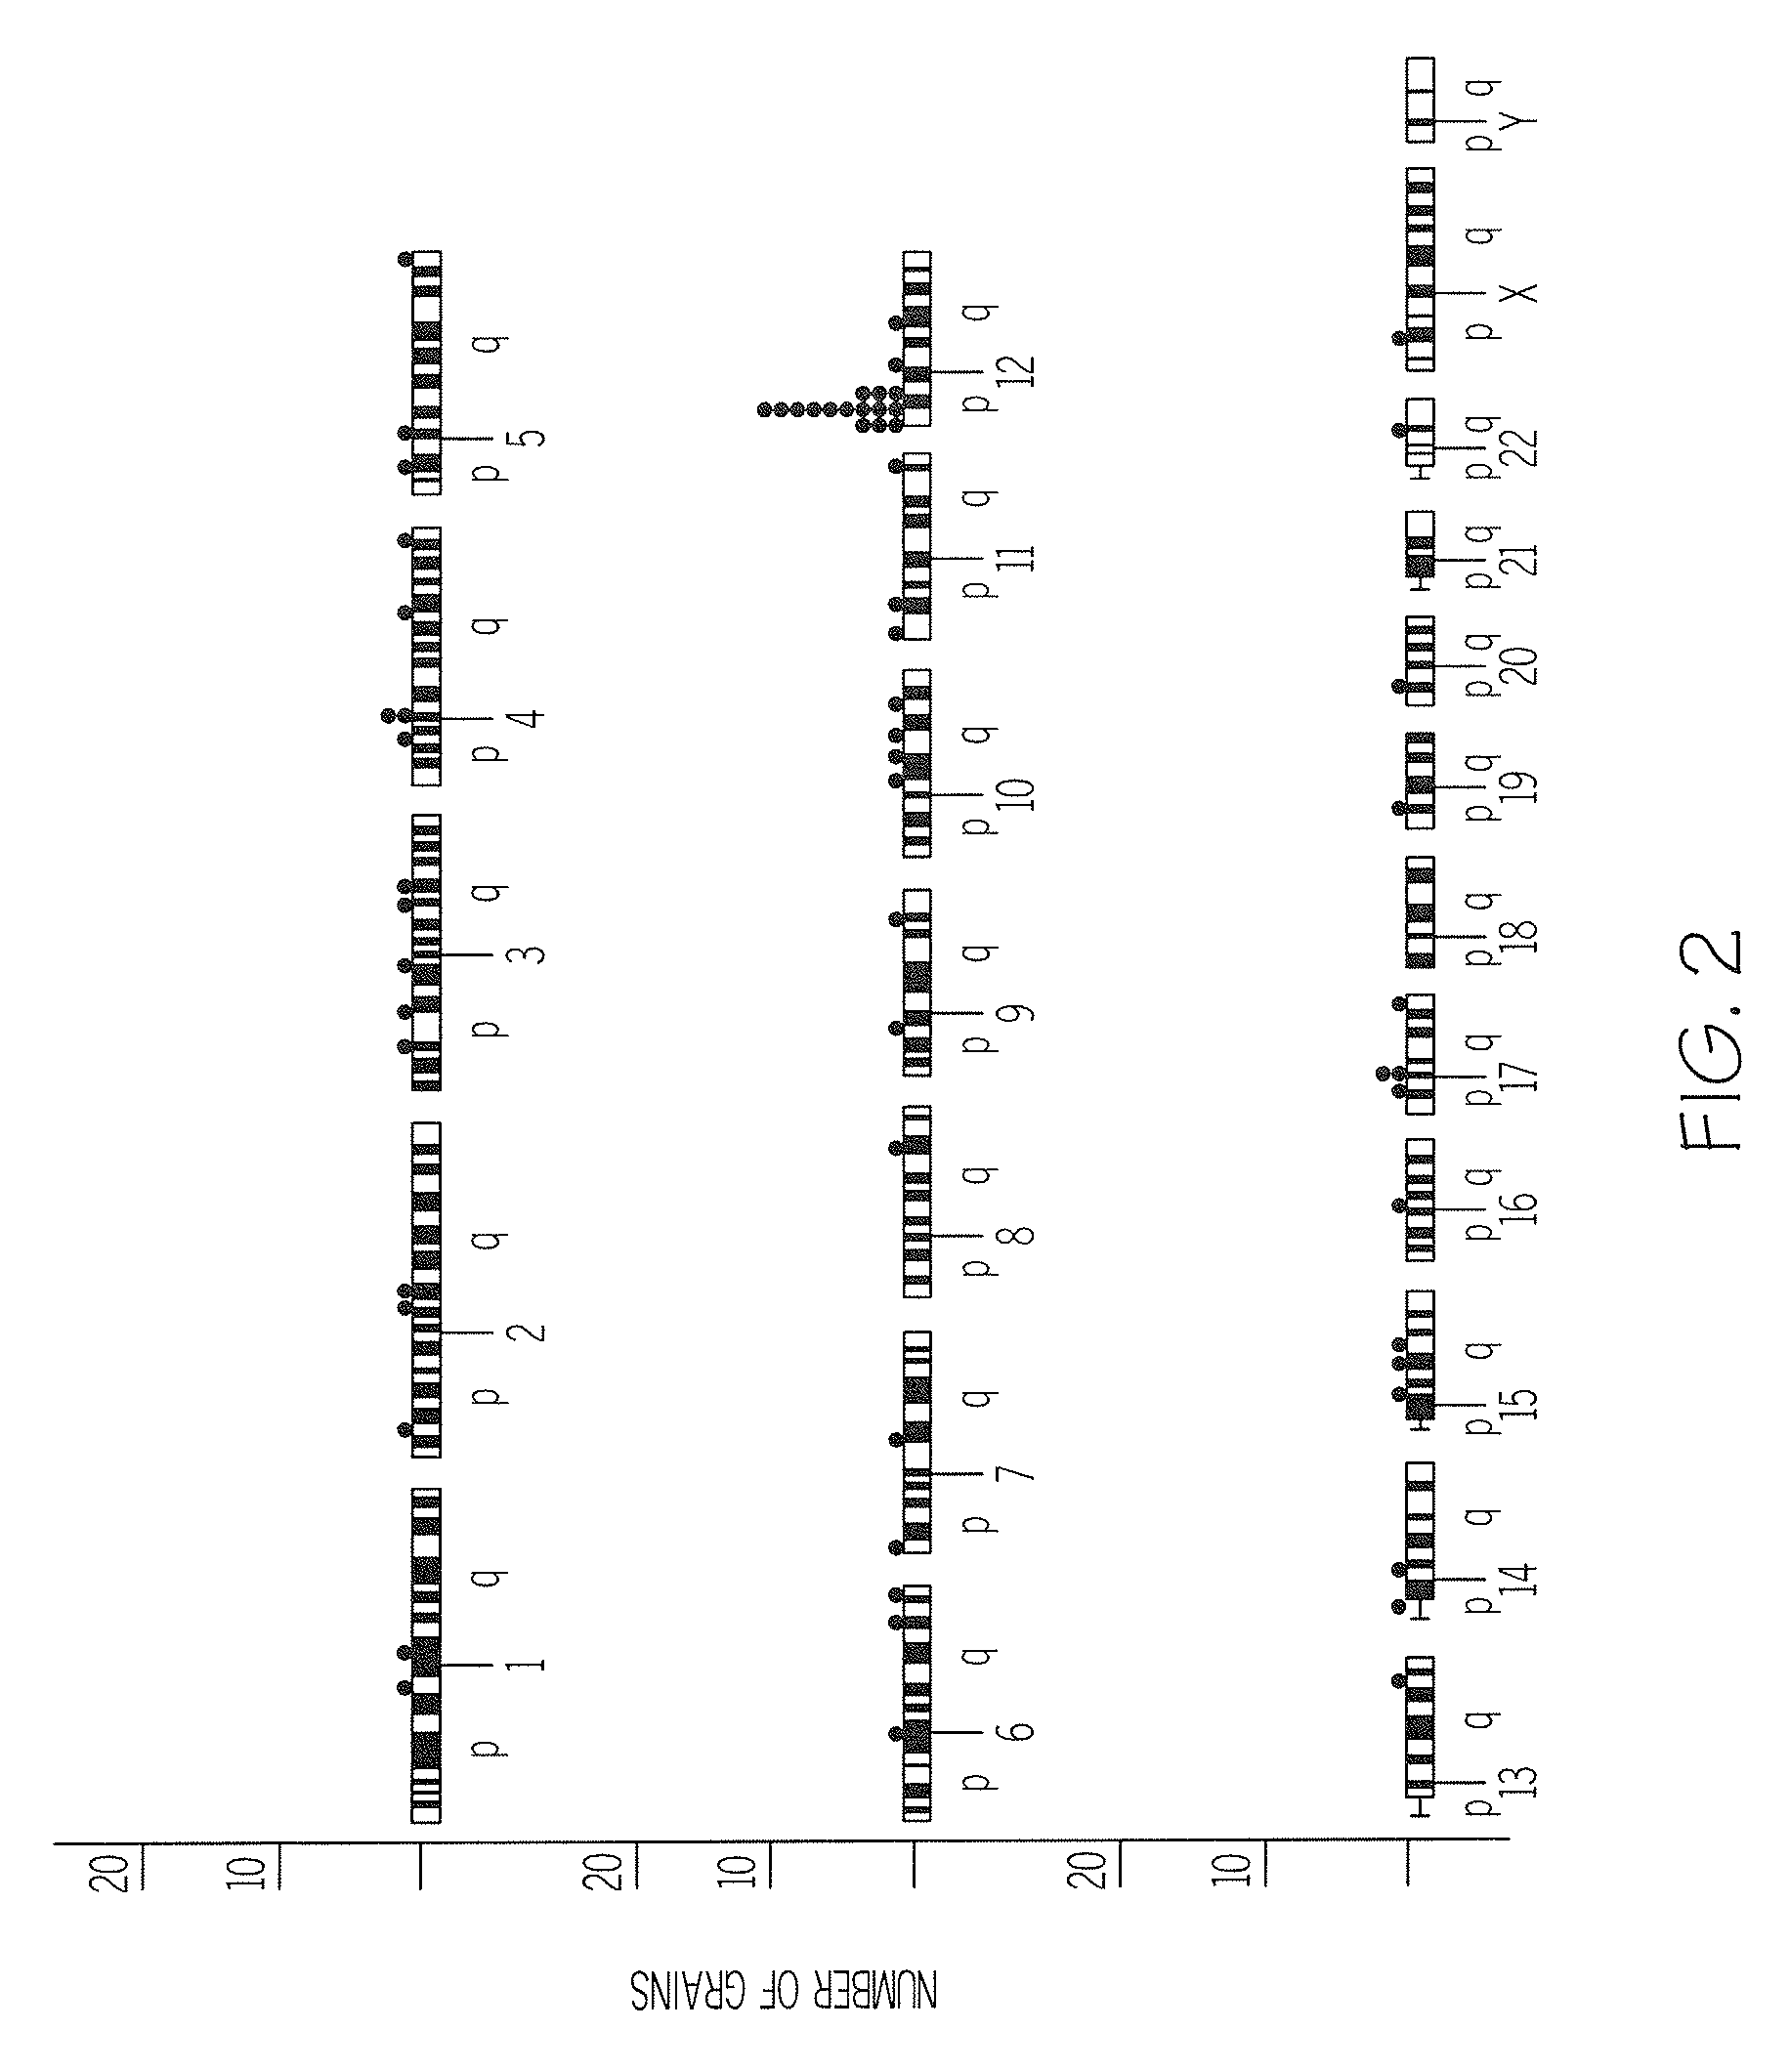 DNA encoding Von Willebrand Factor (VWF) and methods and cells for producing VFW, and VFW produced by the DNA, methods and cells